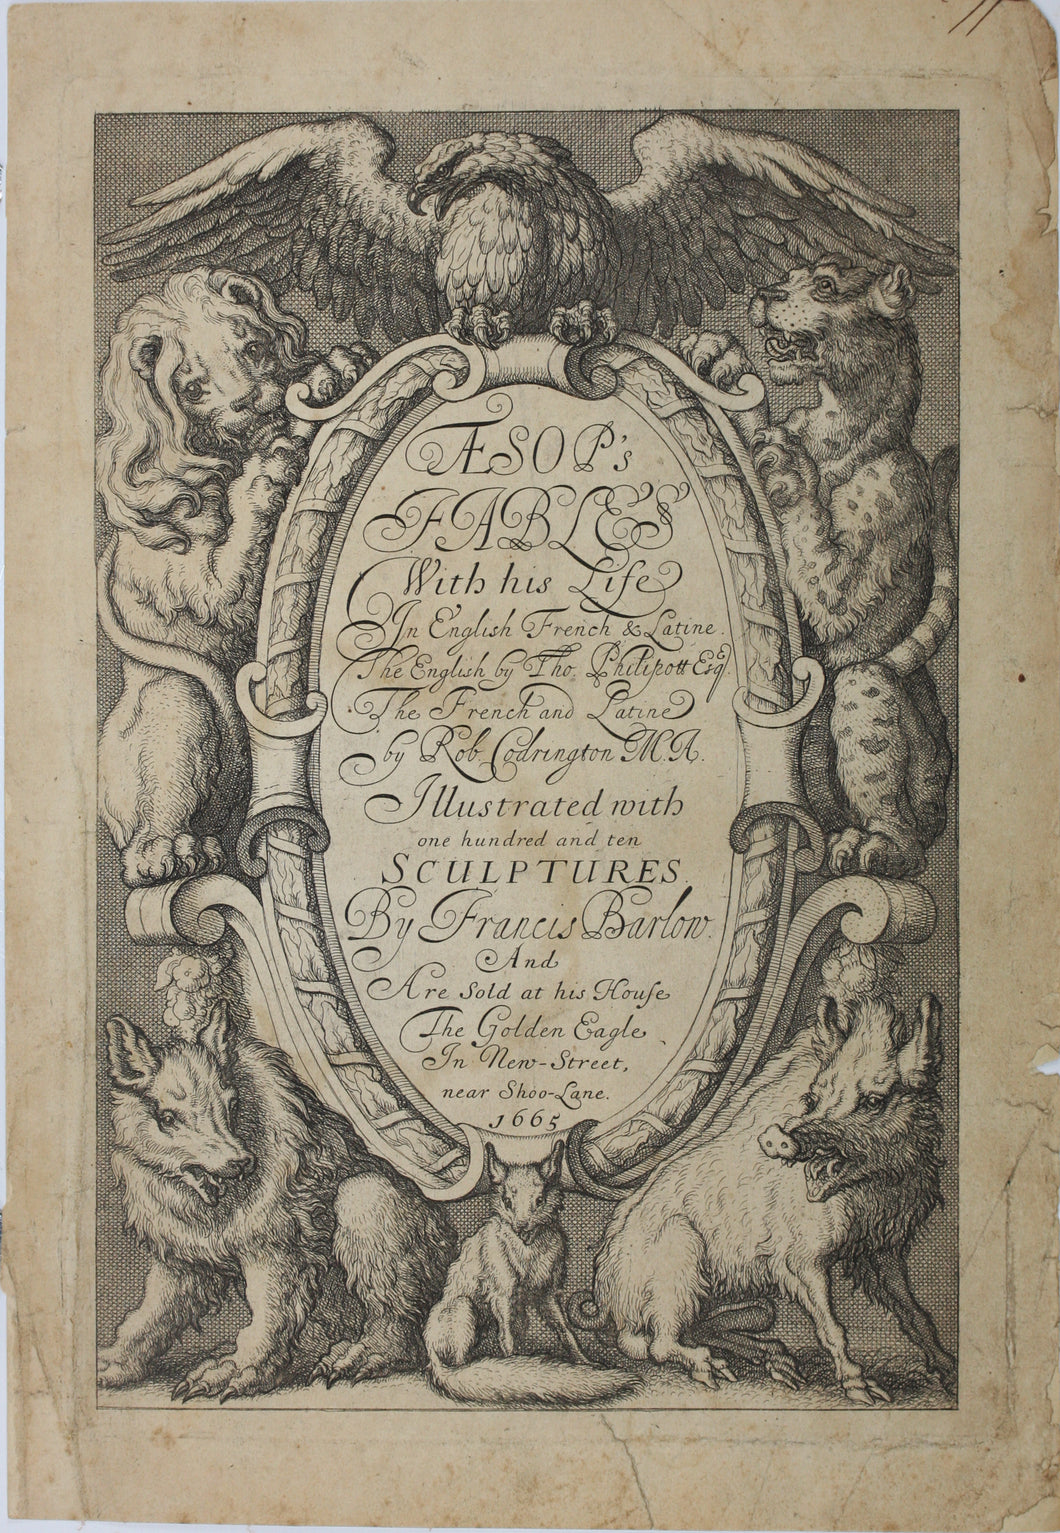 Francis Barlow. Engraved title page from Aesop's Fables. 1665.